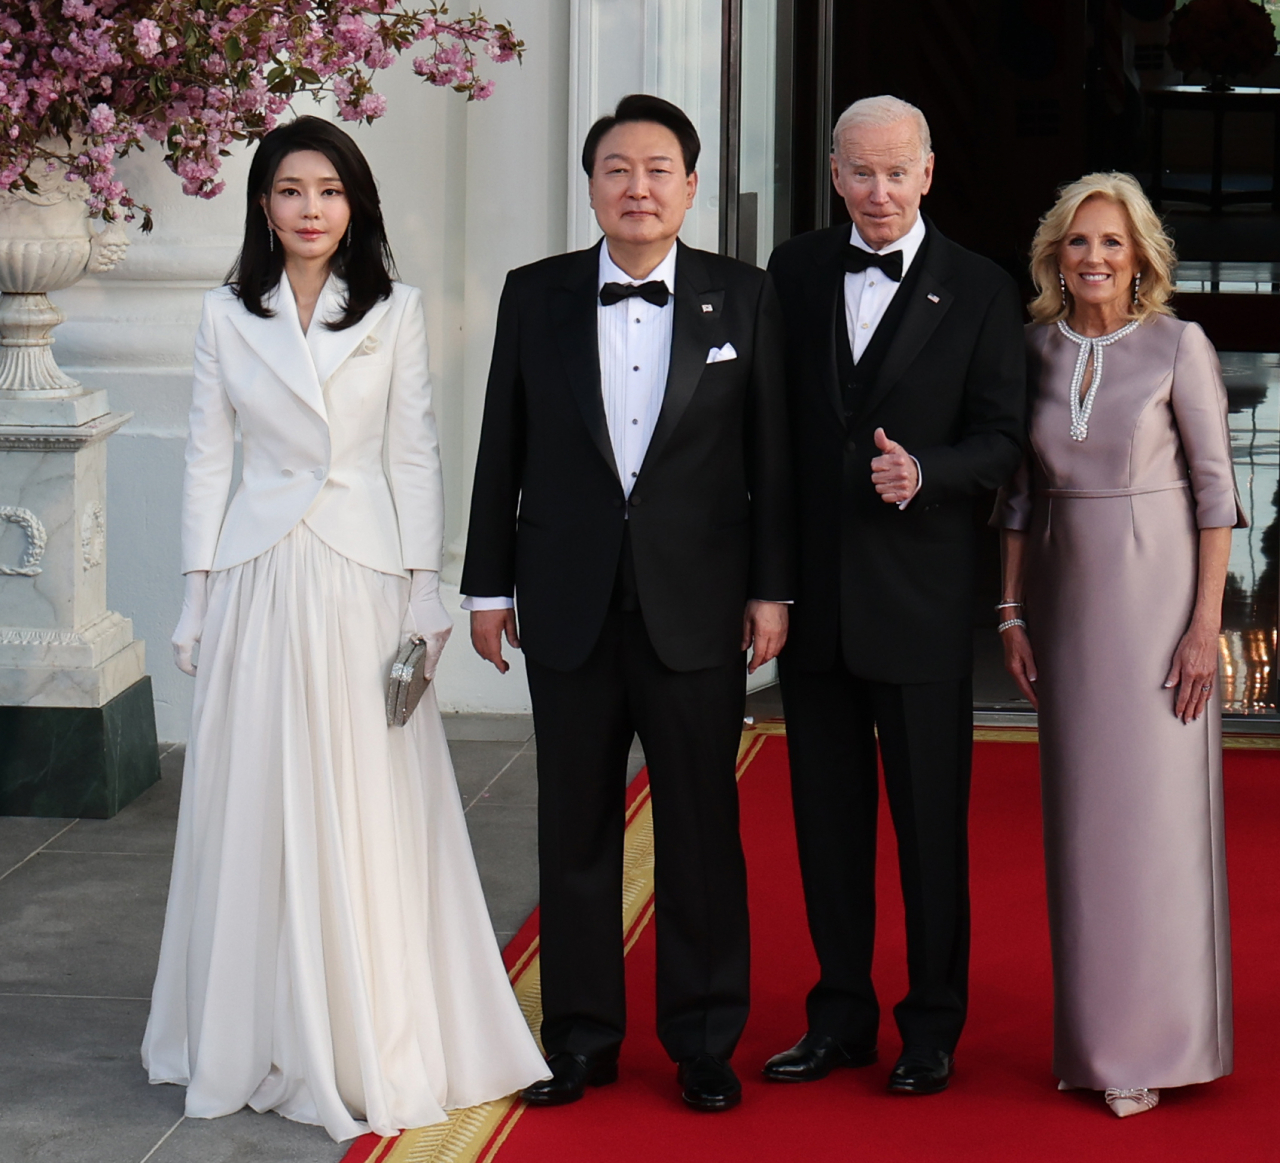 South Korean President Yoon Suk Yeol (second from left), first lady Kim Keon Hee (left), US President Joe Biden (second from right) and US first lady Jill Biden pose for a photo during a state dinner at the White House in Washington last Wednesday. (Yonhap)